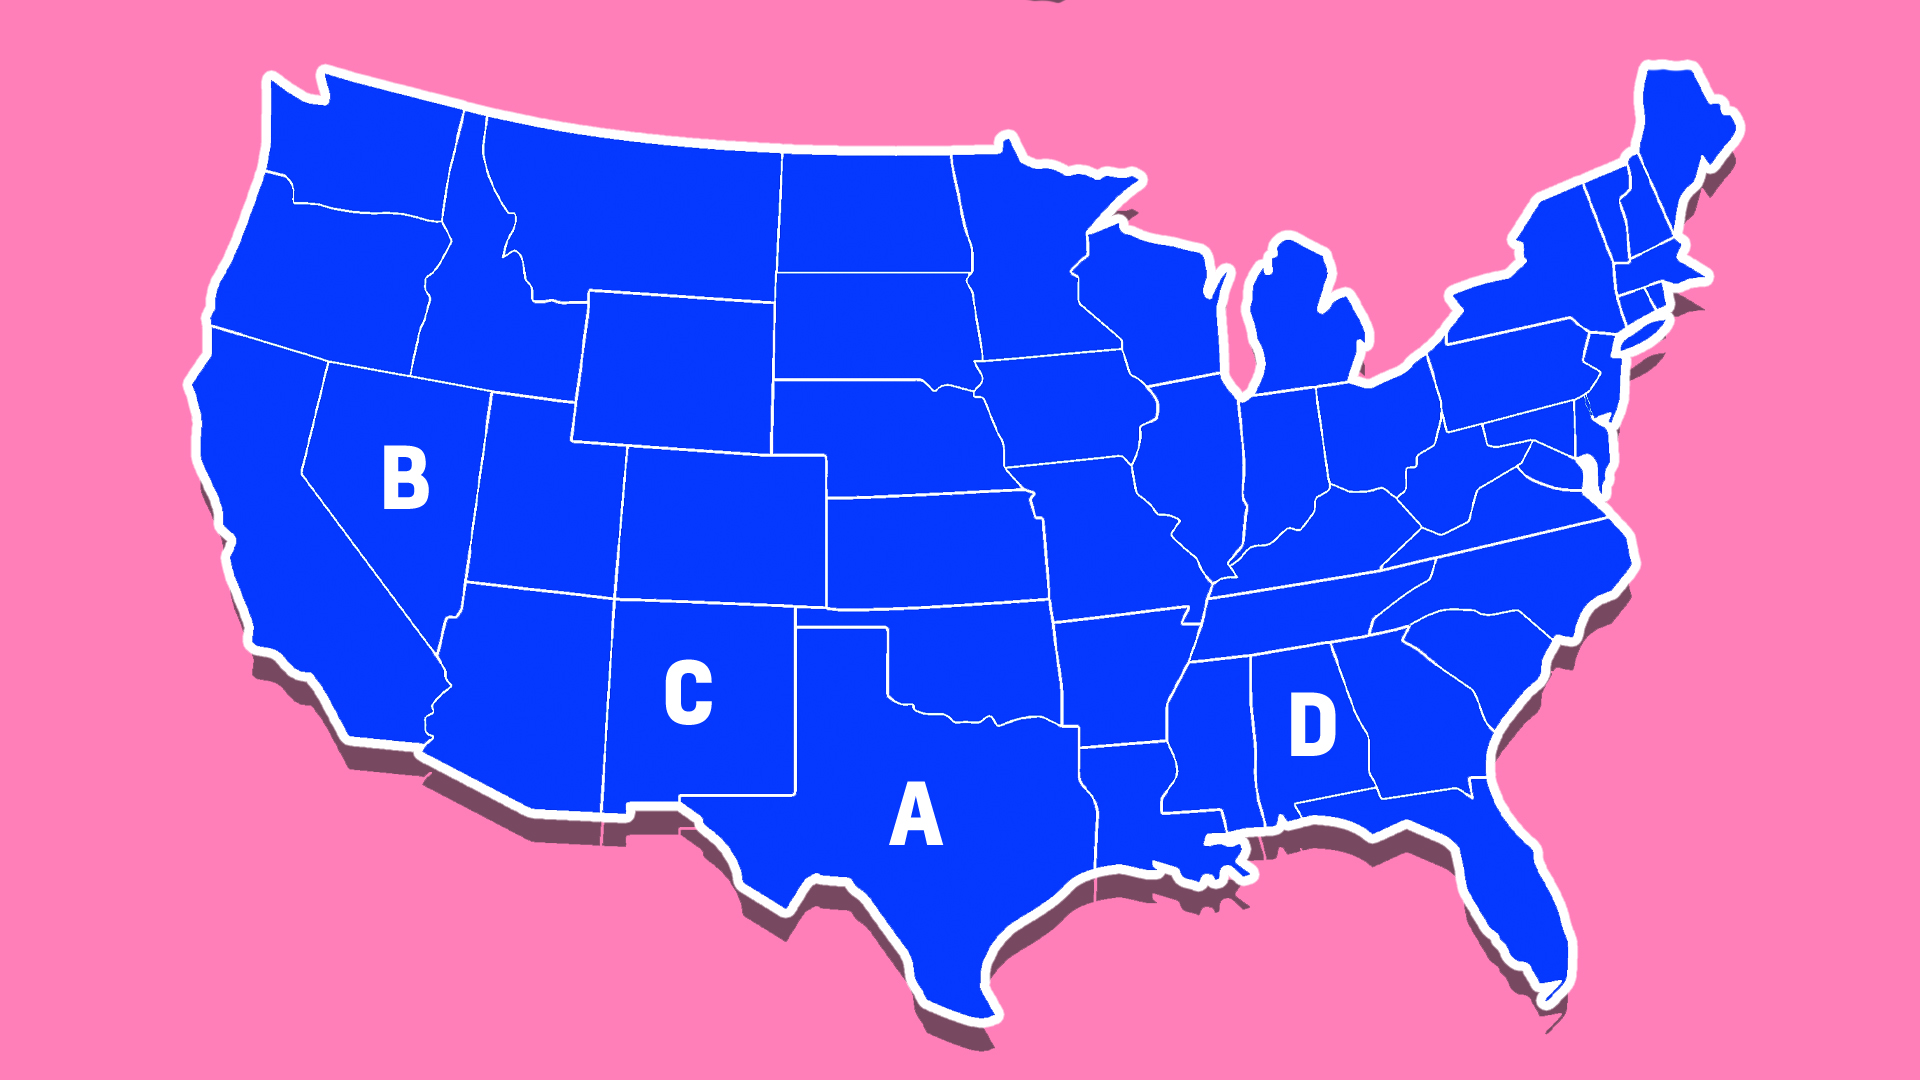 A map of the USA